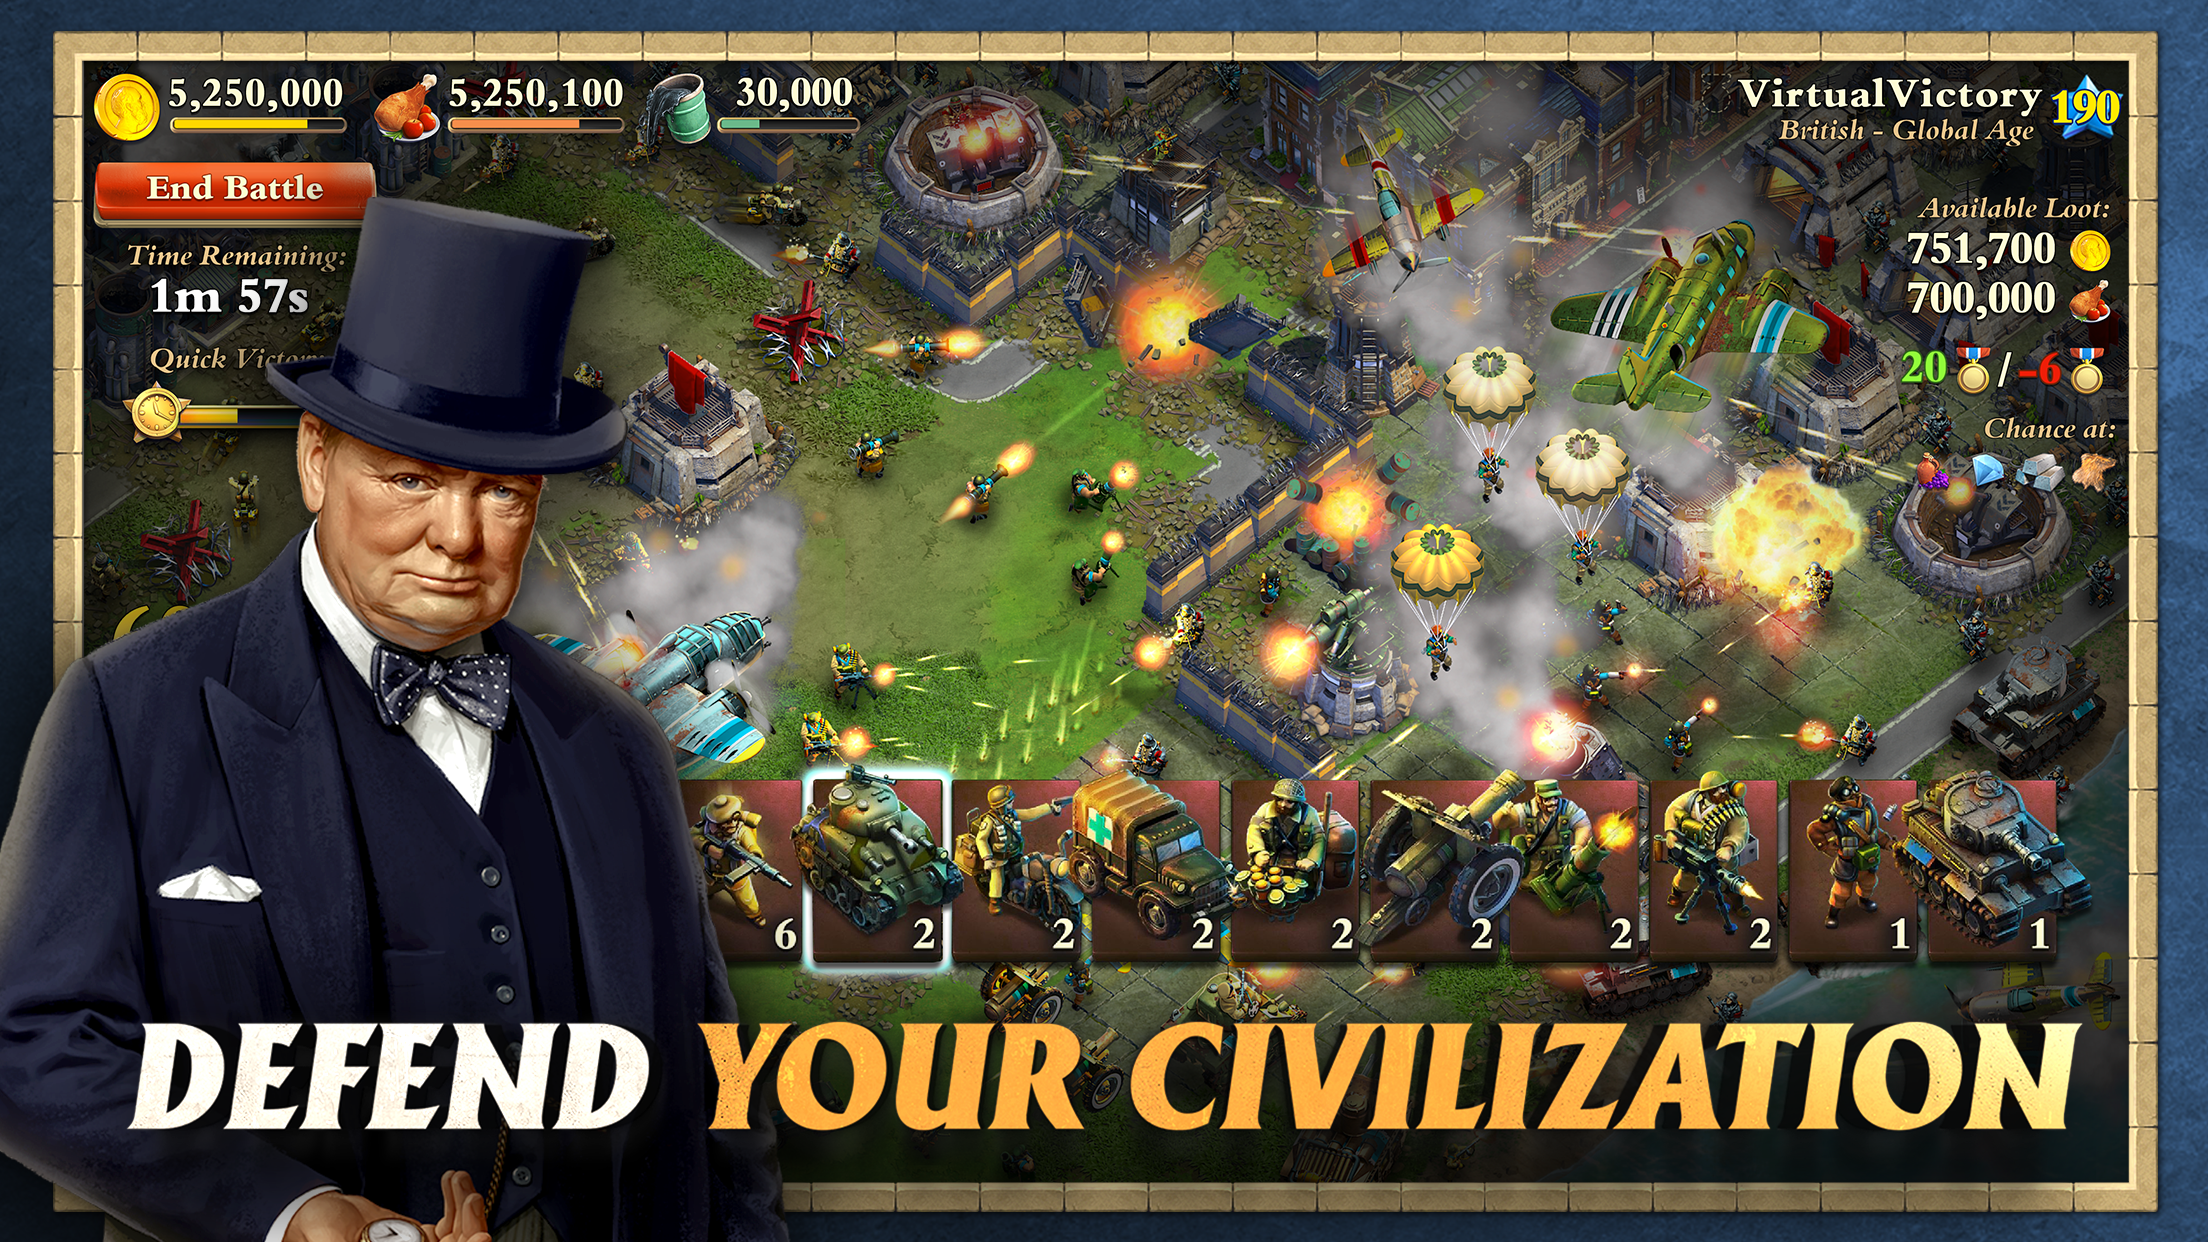 Image from DomiNations